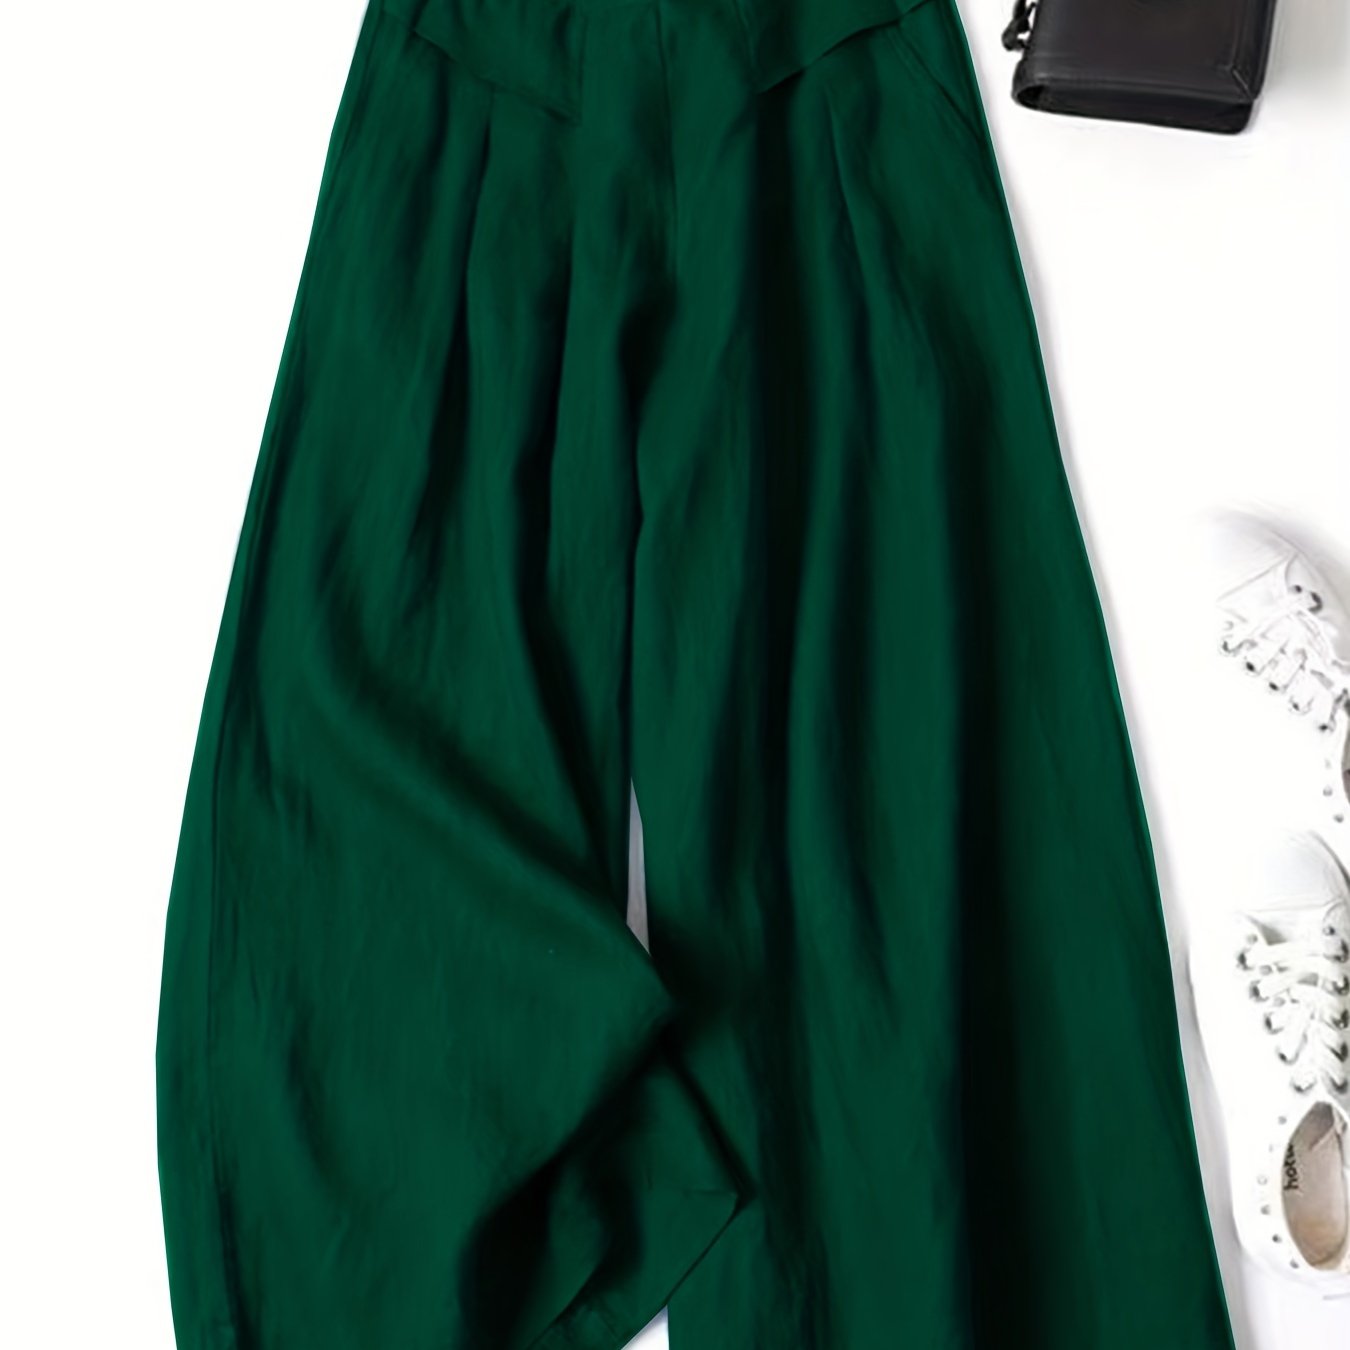 Antmvs Solid Wide Leg Pants, Casual Palazzo Pants For Spring & Summer, Women's Clothing